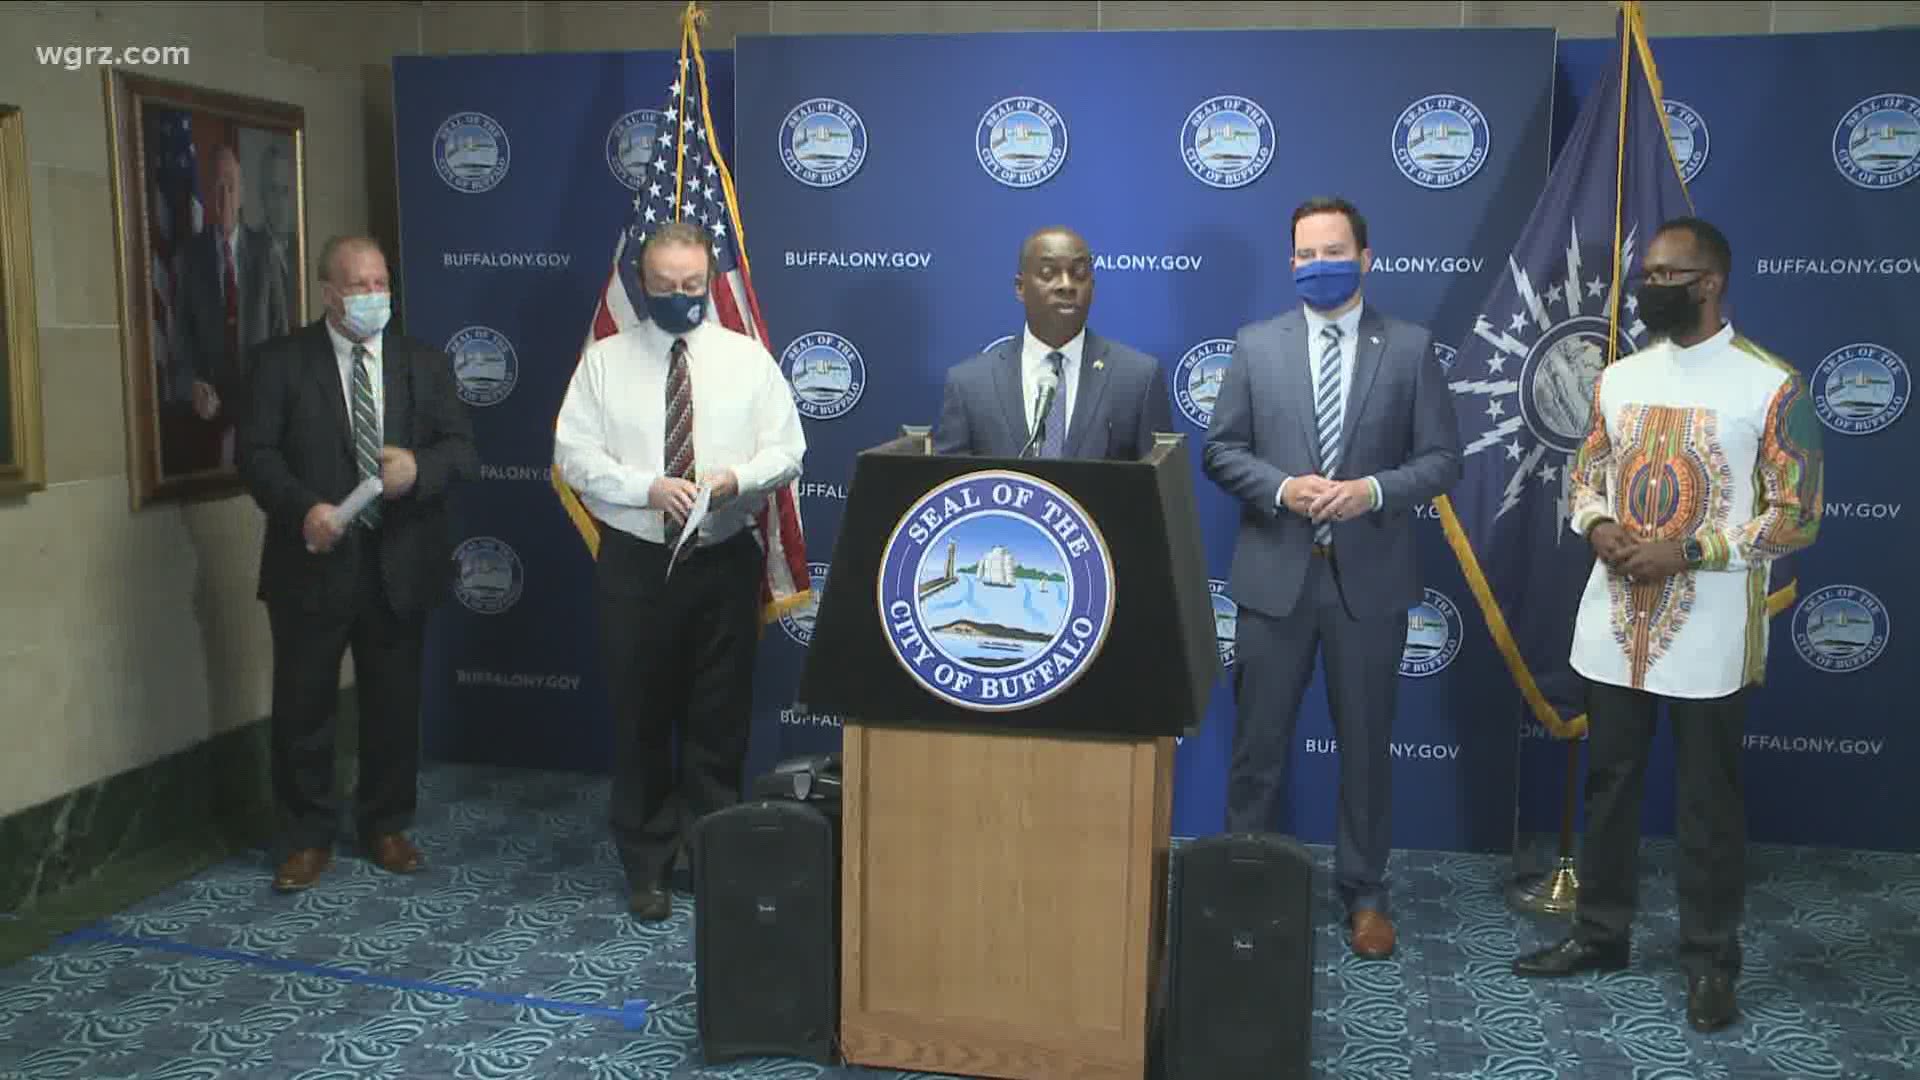 Buffalo Mayor Byron Brown announced today.. new initiatives on police reform meant to ease tensions with the community.